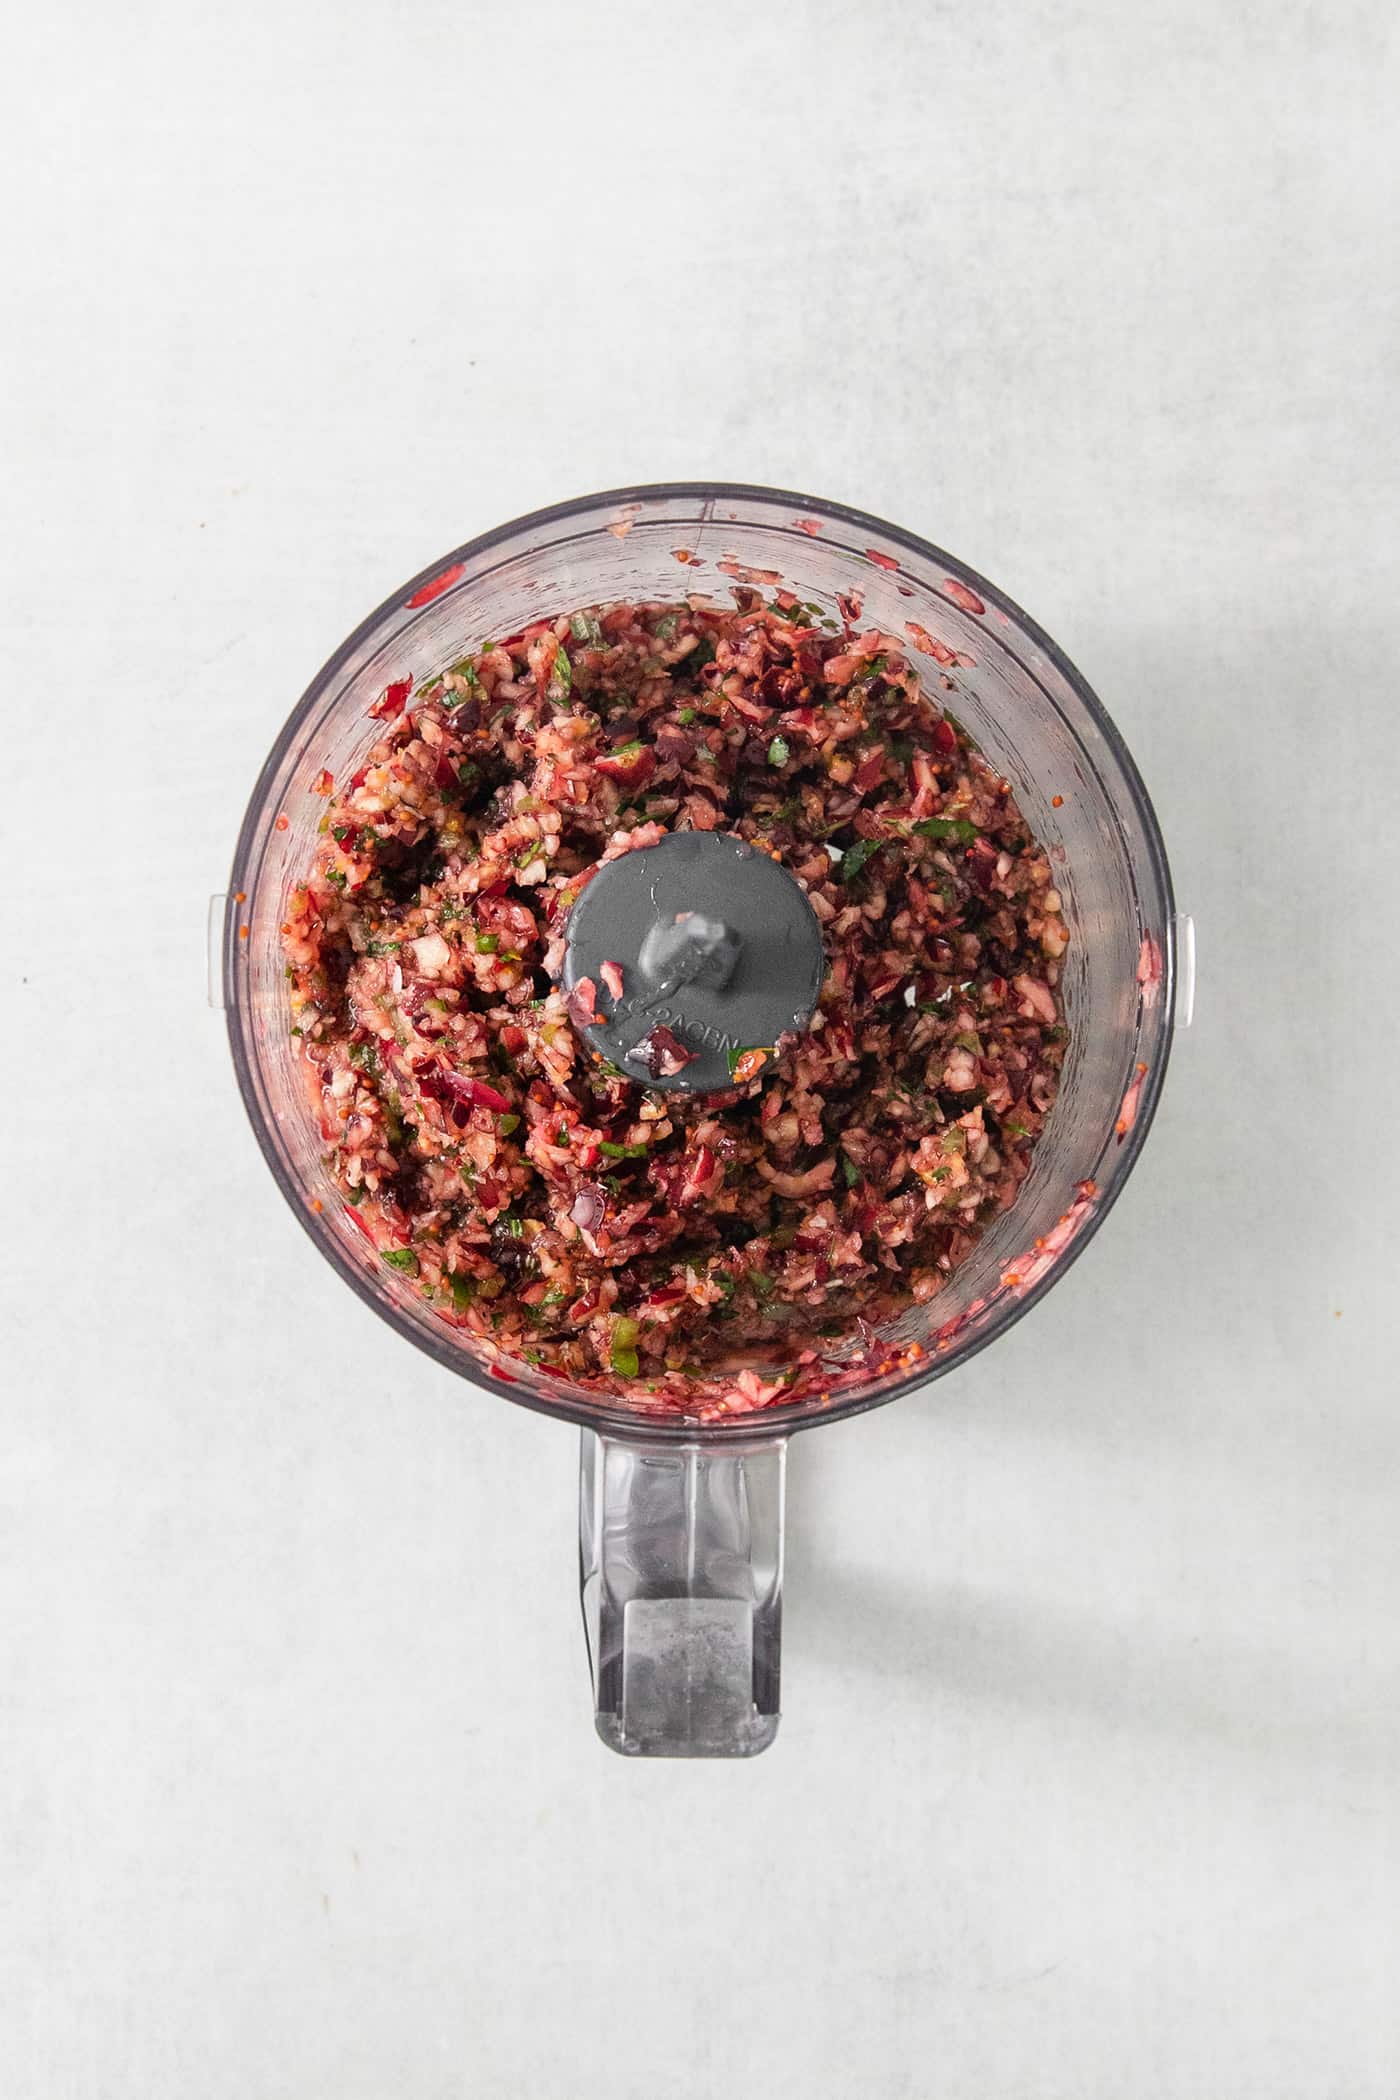 Cranberries are pulsed in a food processor.